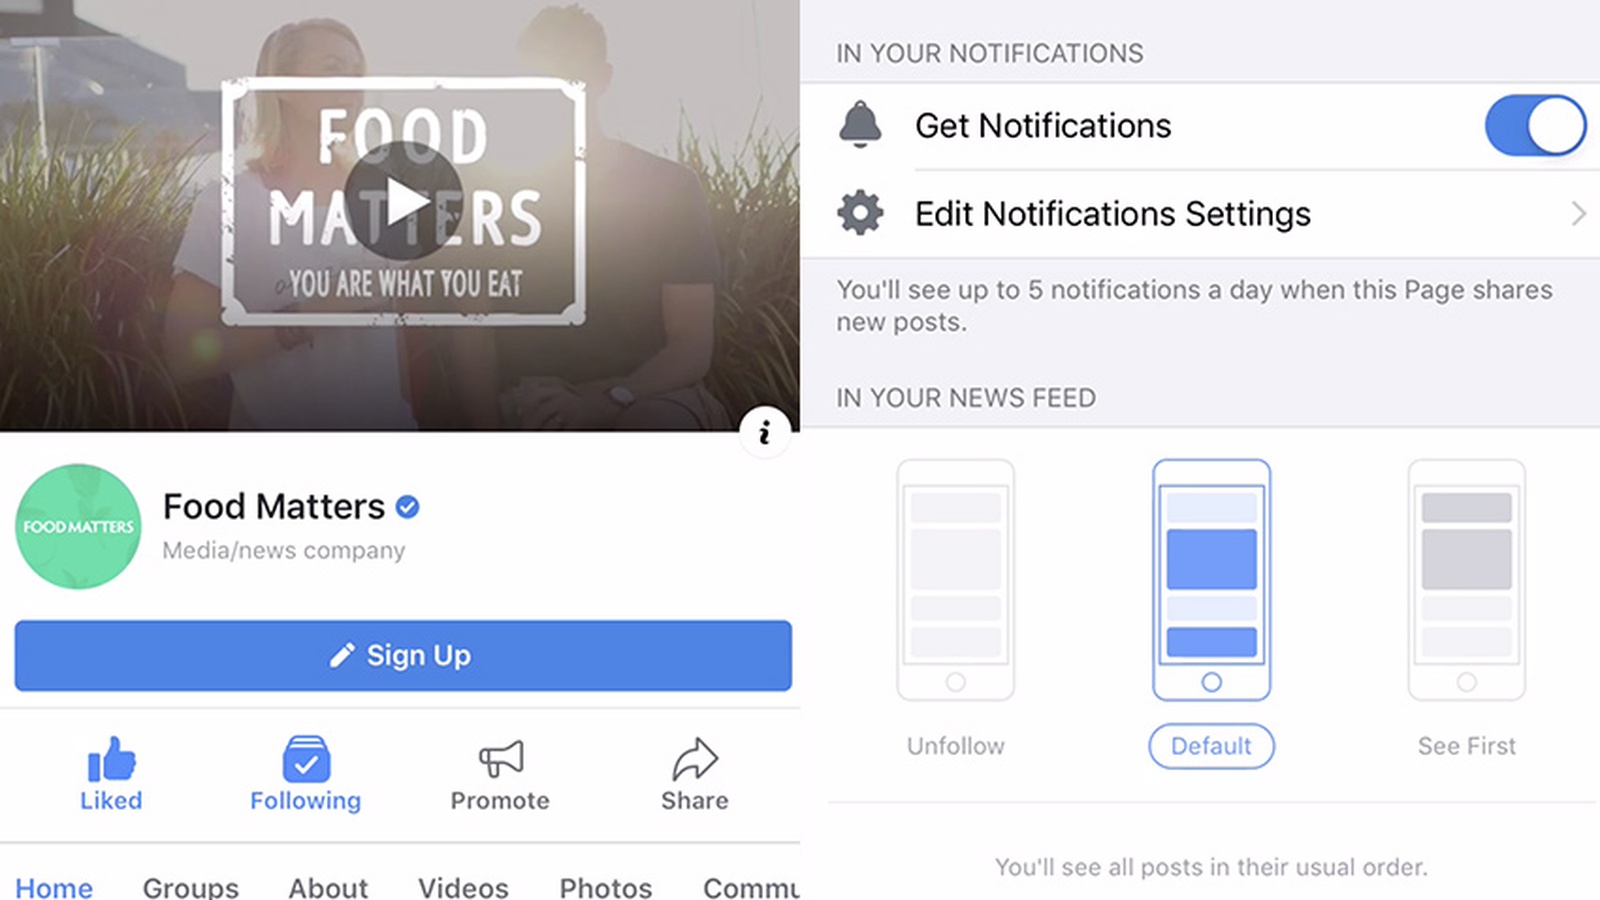 How to Make Sure You See Food Matters Stories First on Facebook